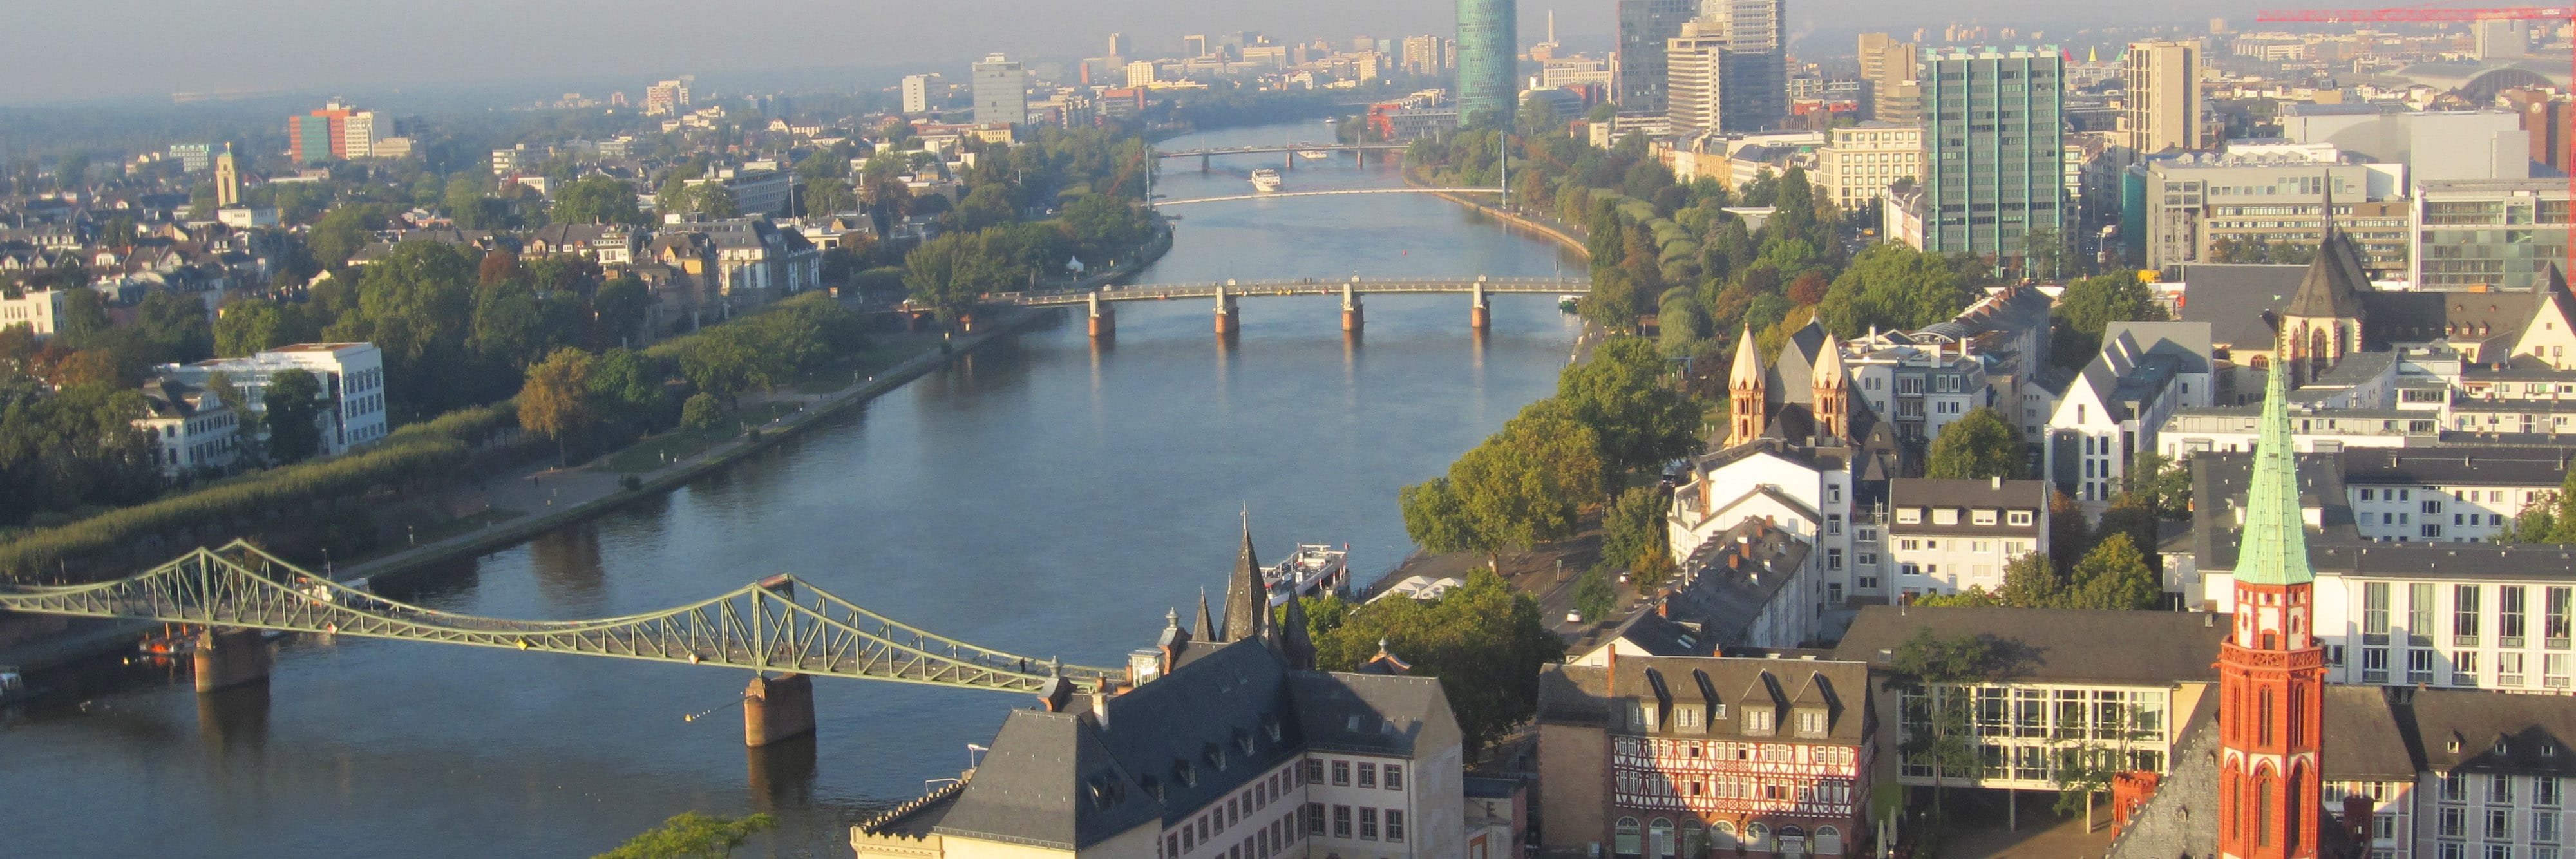 Frankfurt skyline and river in the morning